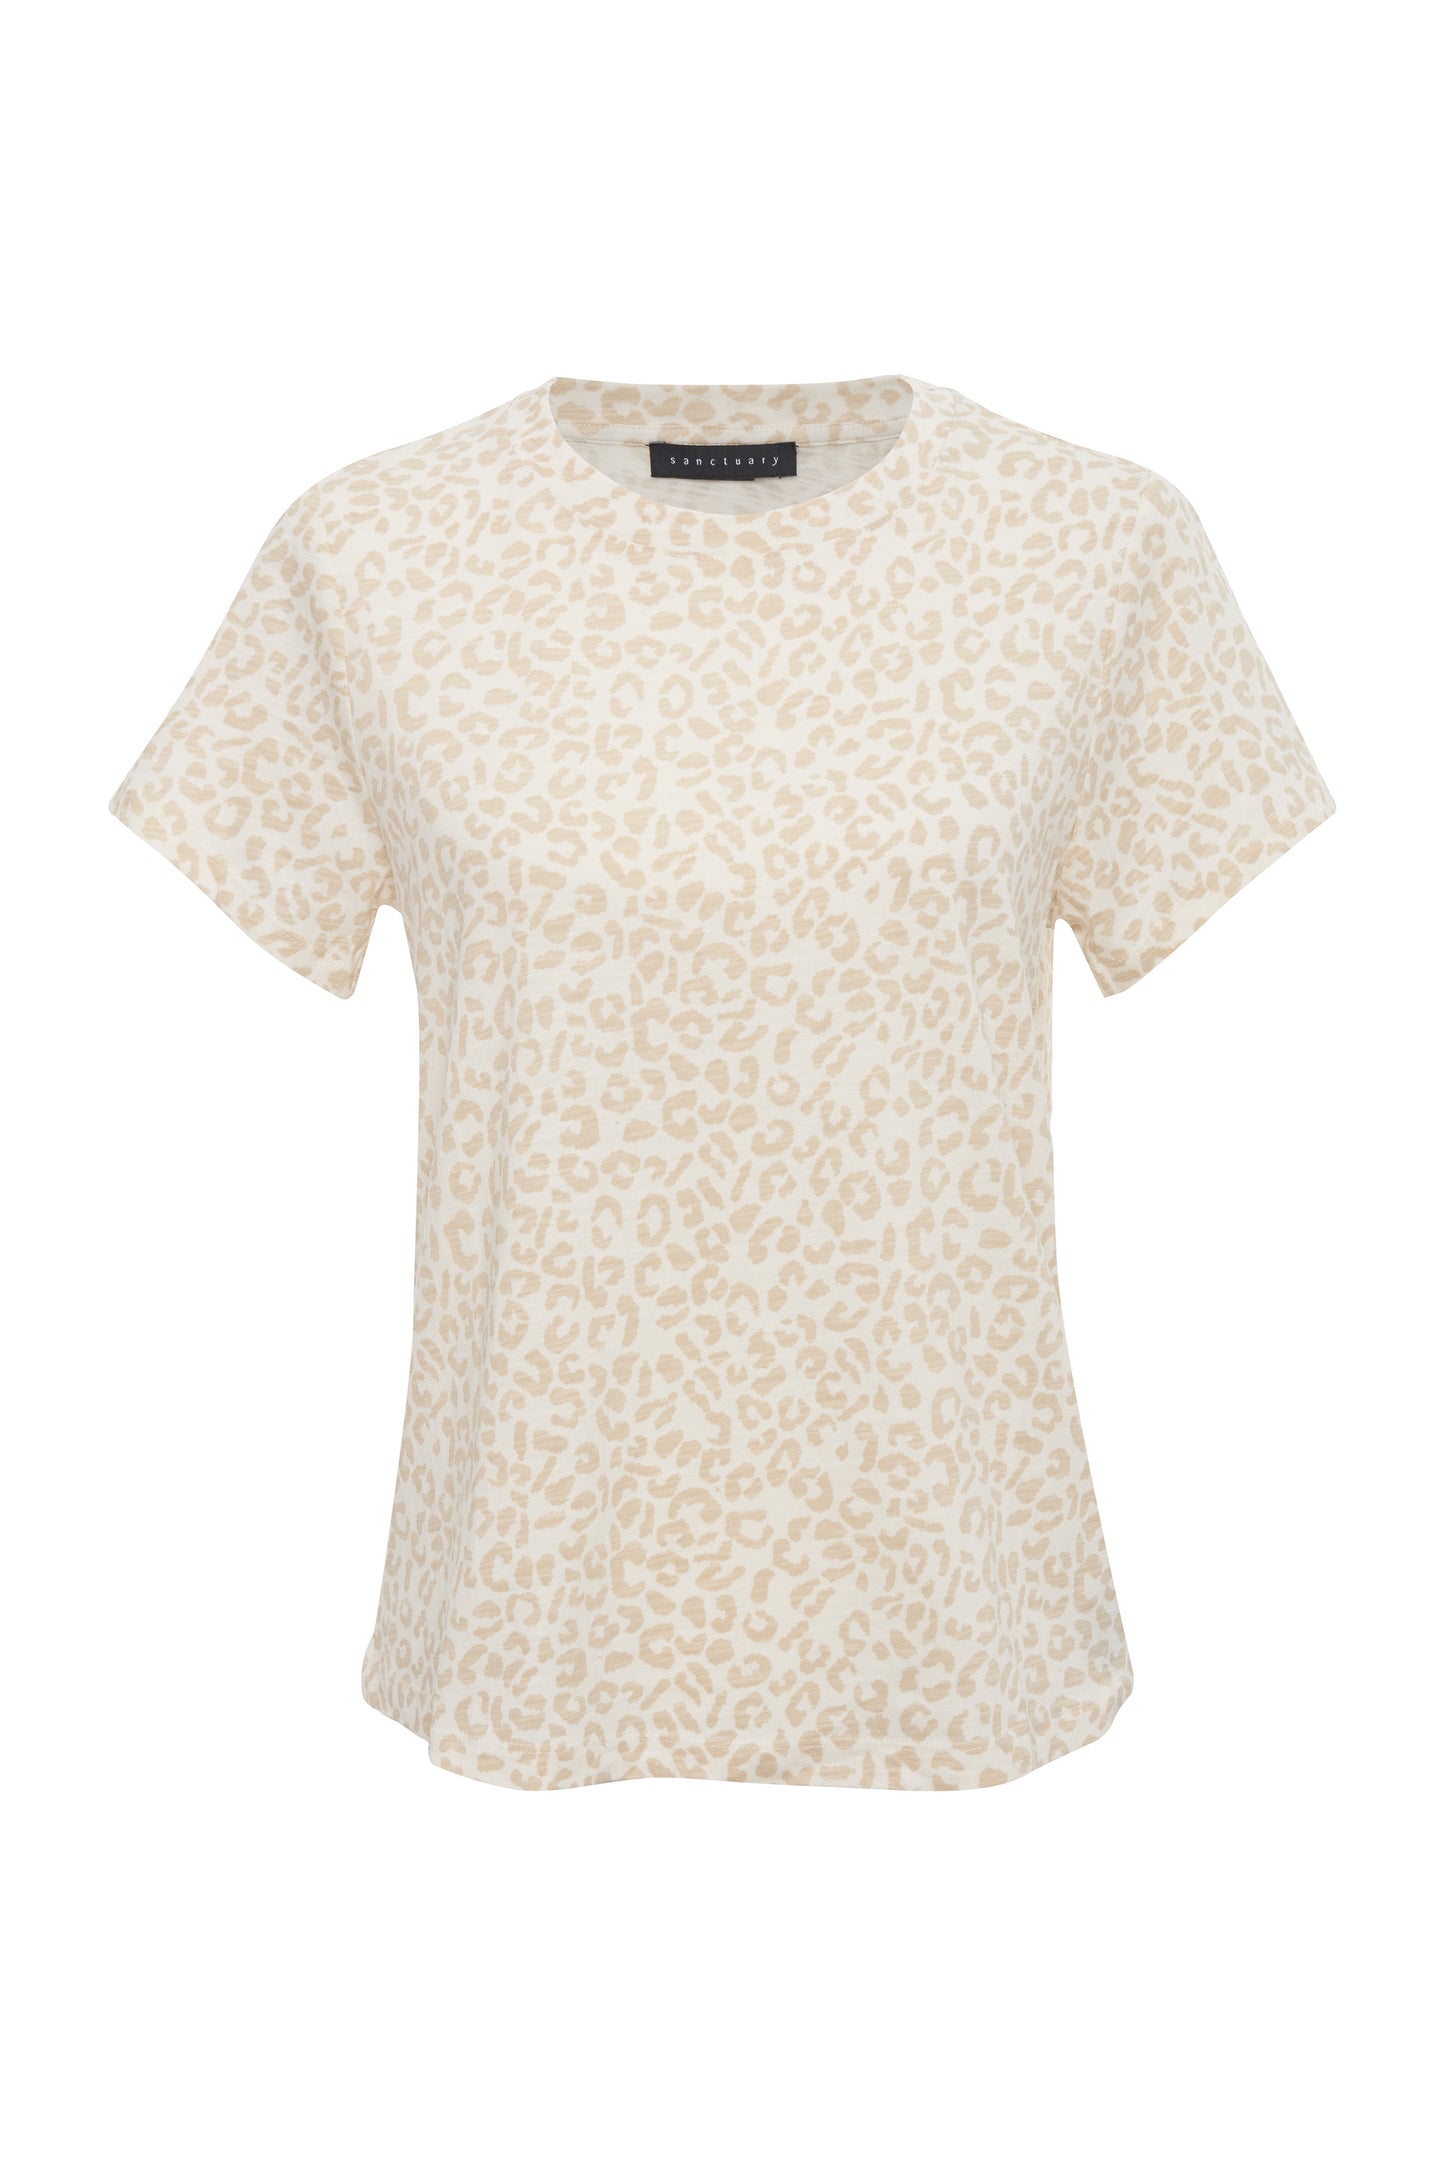 Barely Leopard Tee